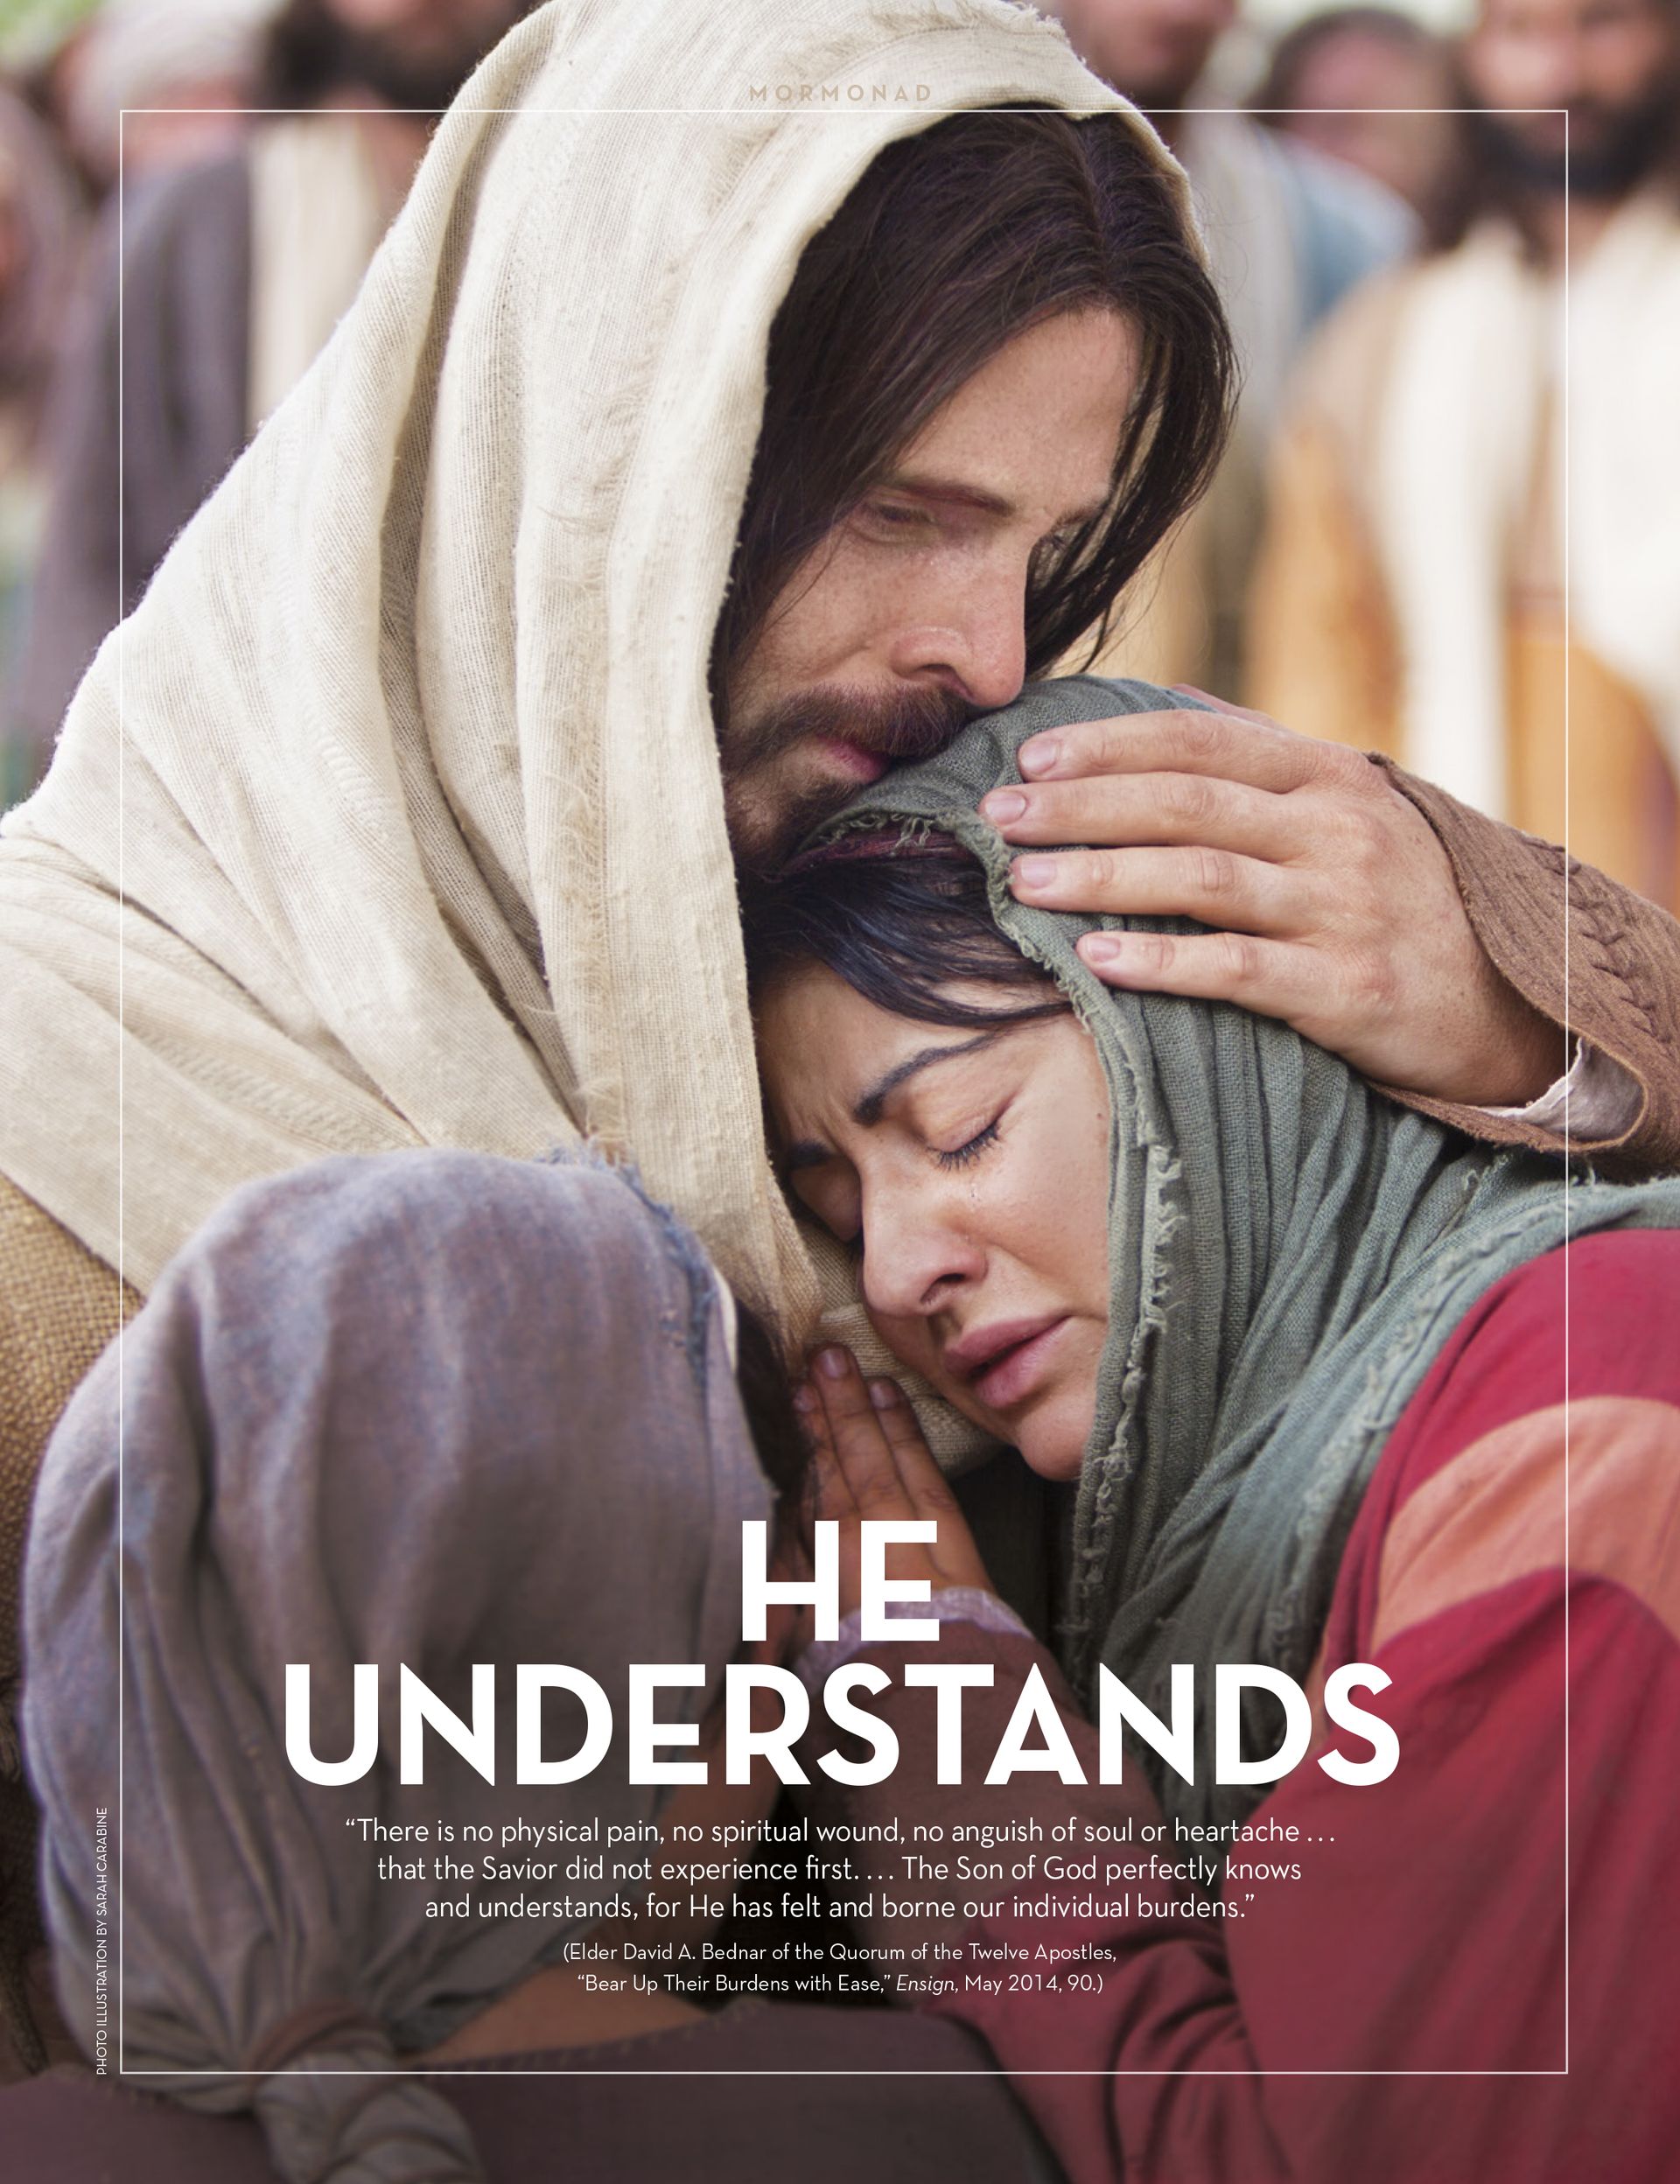 He Understands. “There is no physical pain, no spiritual wound, no anguish of soul or heartache ... that the Savior did not experience first. ... The Son of God perfectly knows and understands, for He has felt and borne our individual burdens.” (Elder David A. Bednar of the Quorum of the Twelve Apostles, “Bear Up Their Burdens with Ease,” Ensign, May 2014, 90.) Apr. 2015 © undefined ipCode 1.